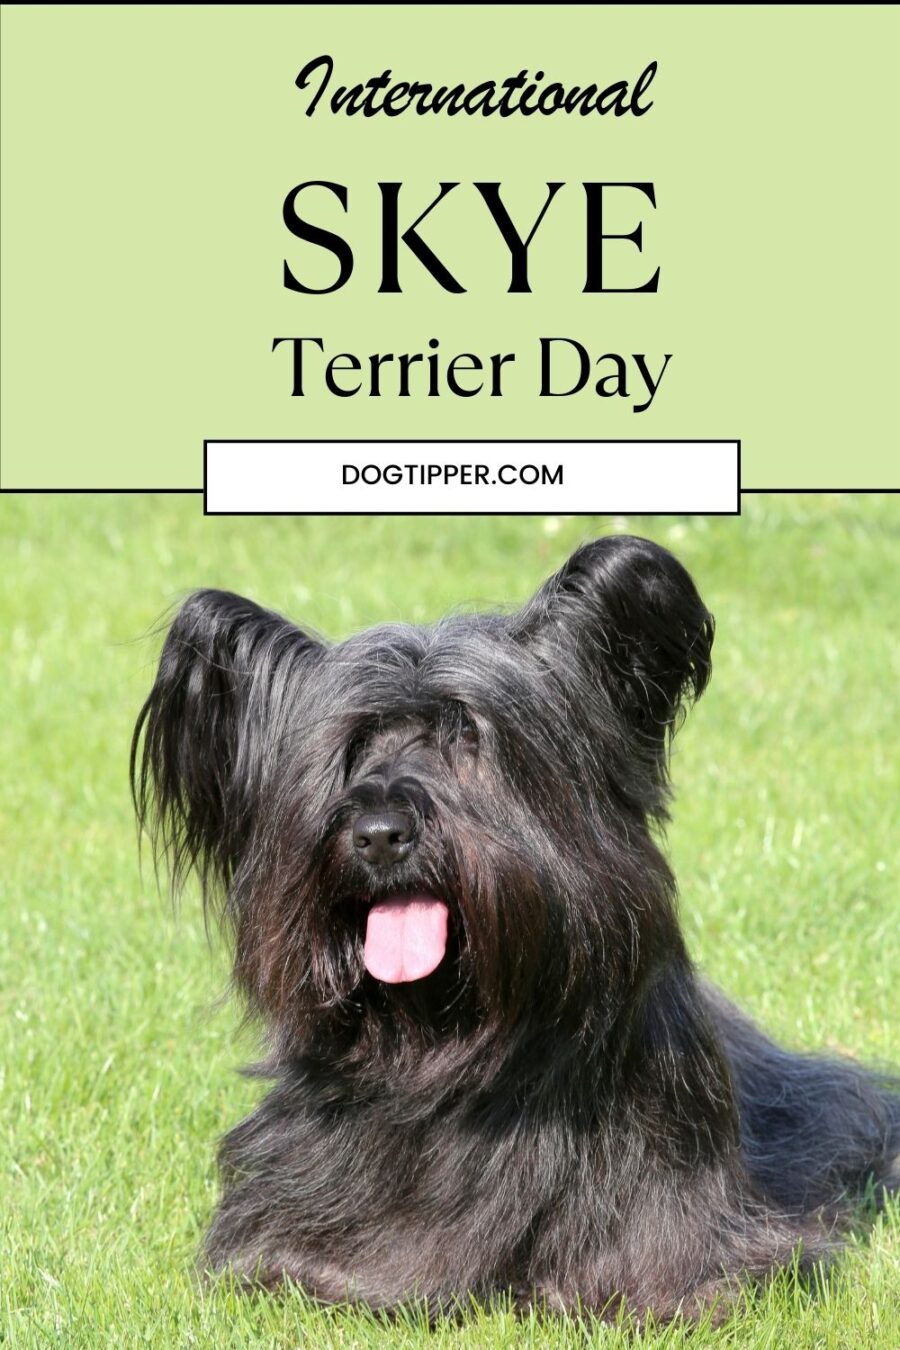 Black Skye Terrier on a green grass lawn with words International Skye Terrier Day at top of image